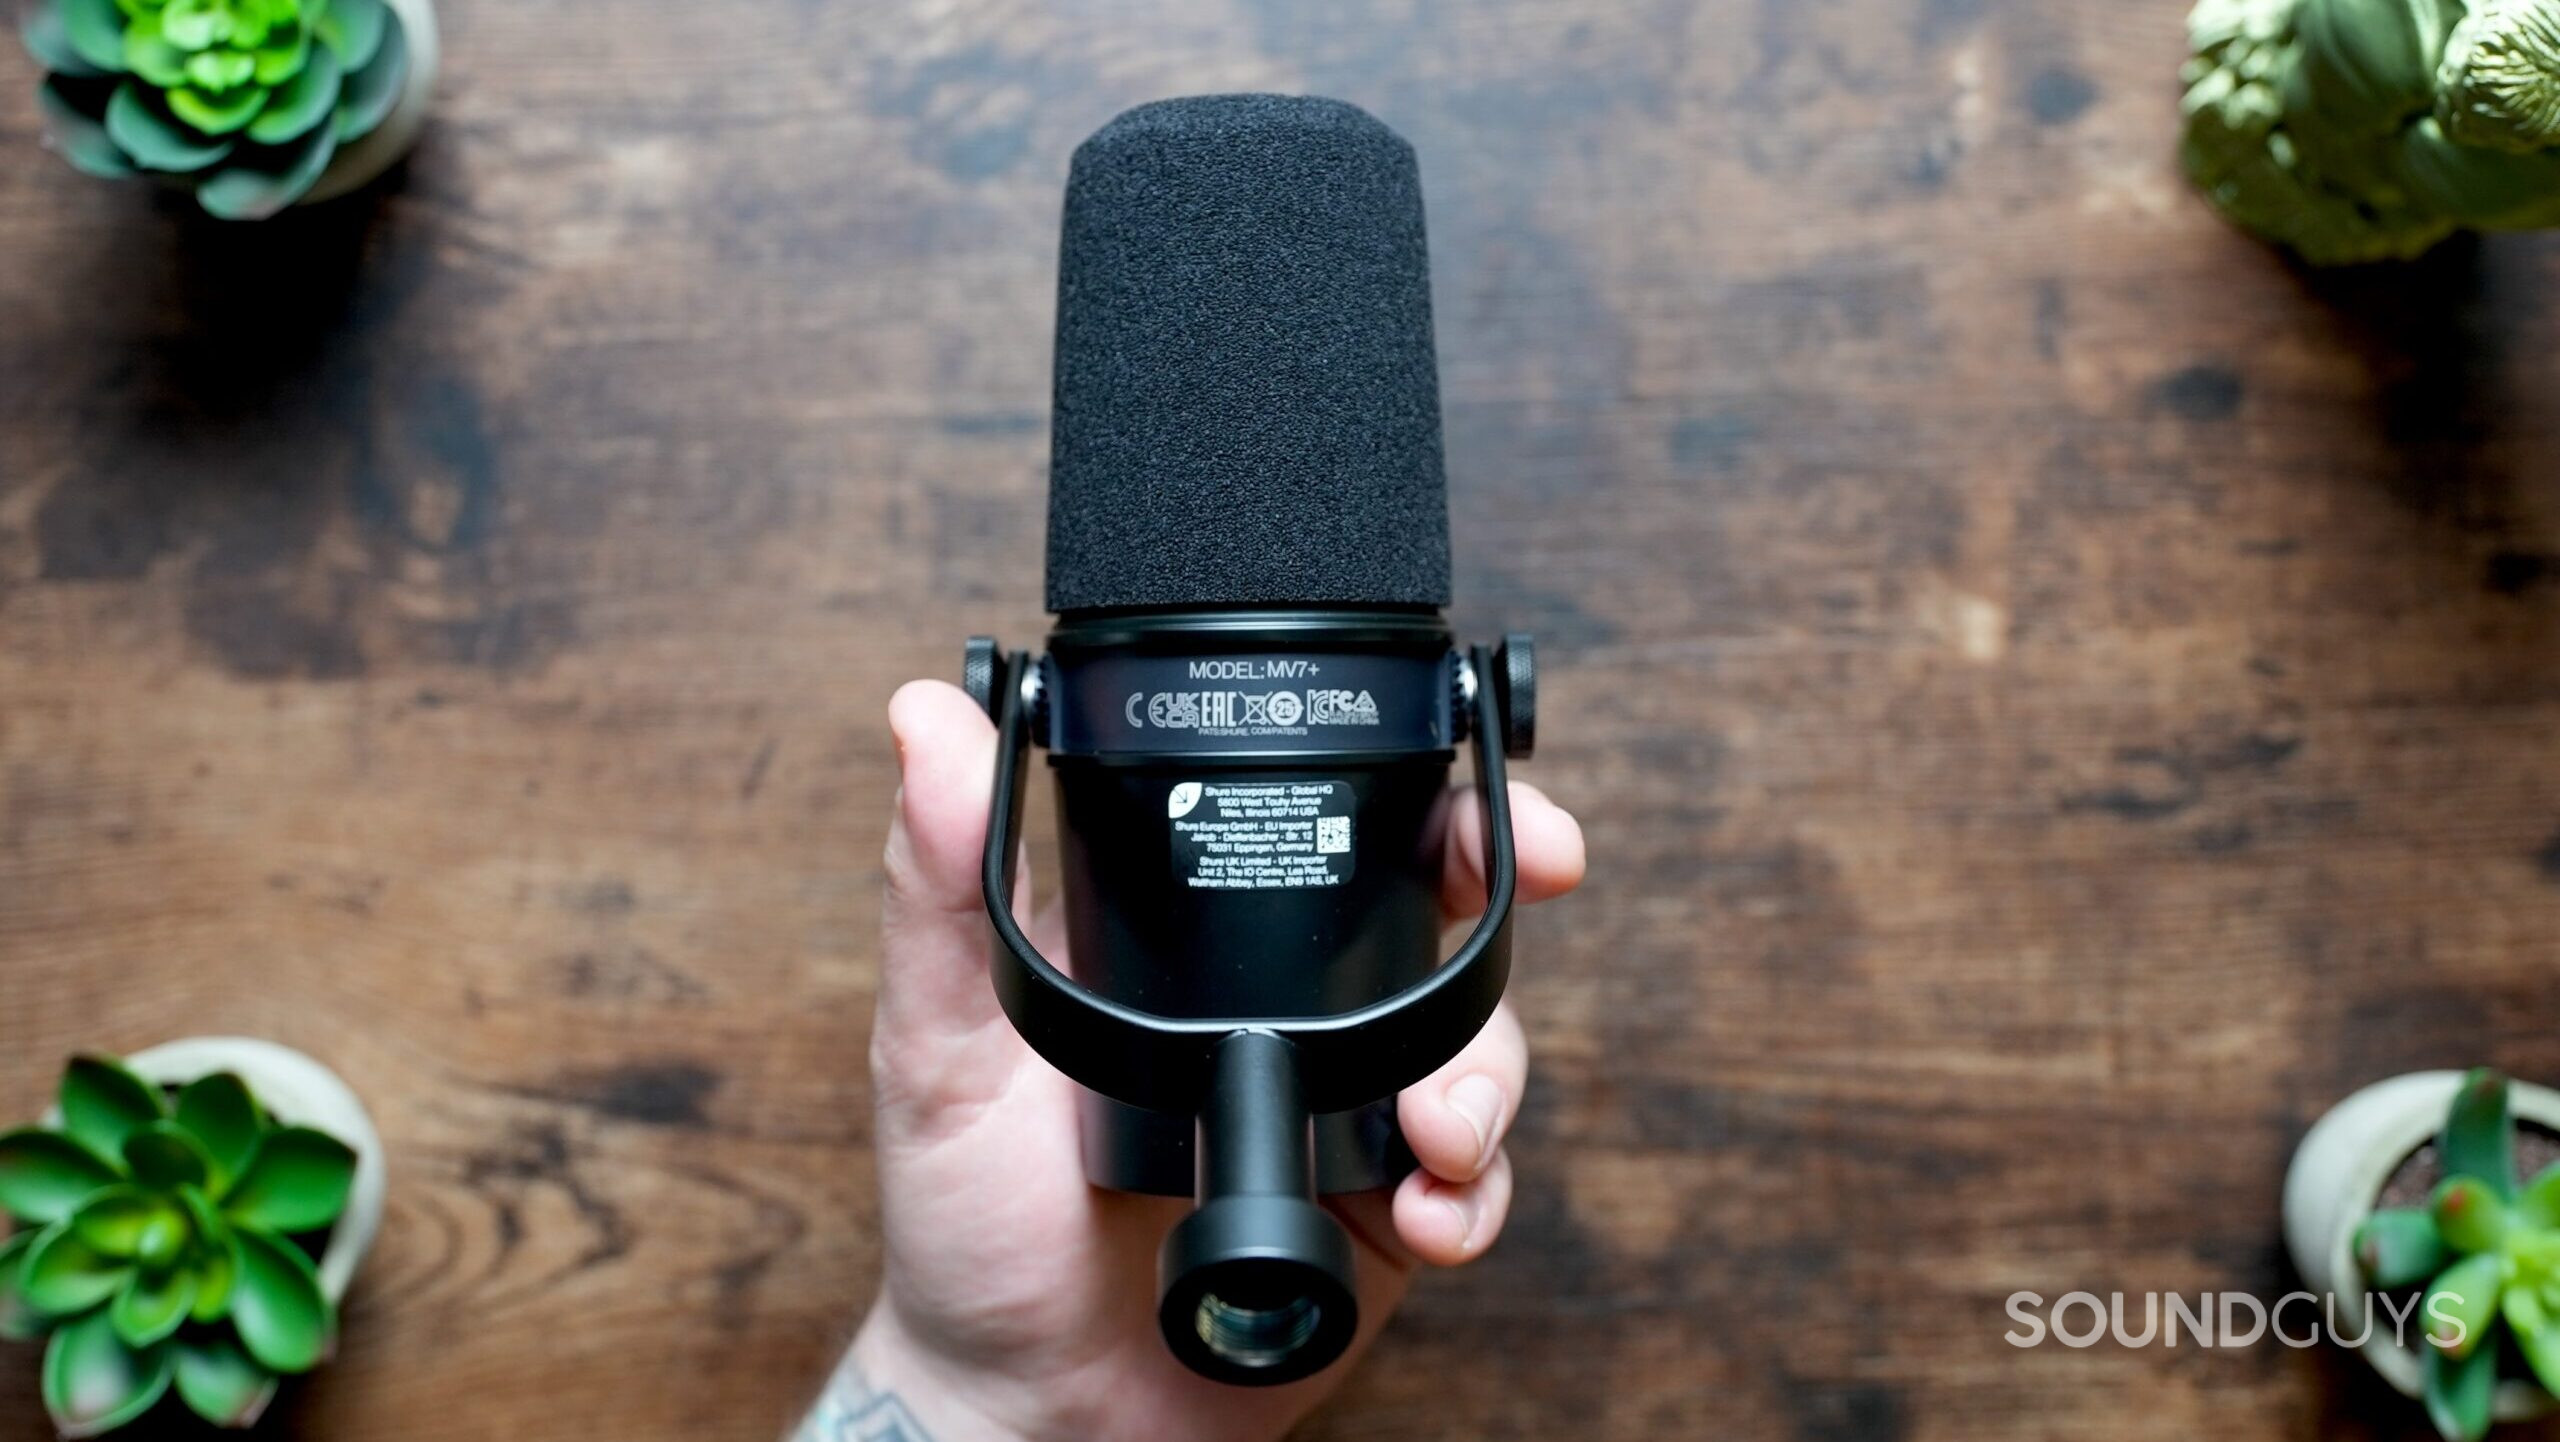 Top down shot, showing the underside of the Shure MV7+ microphone.